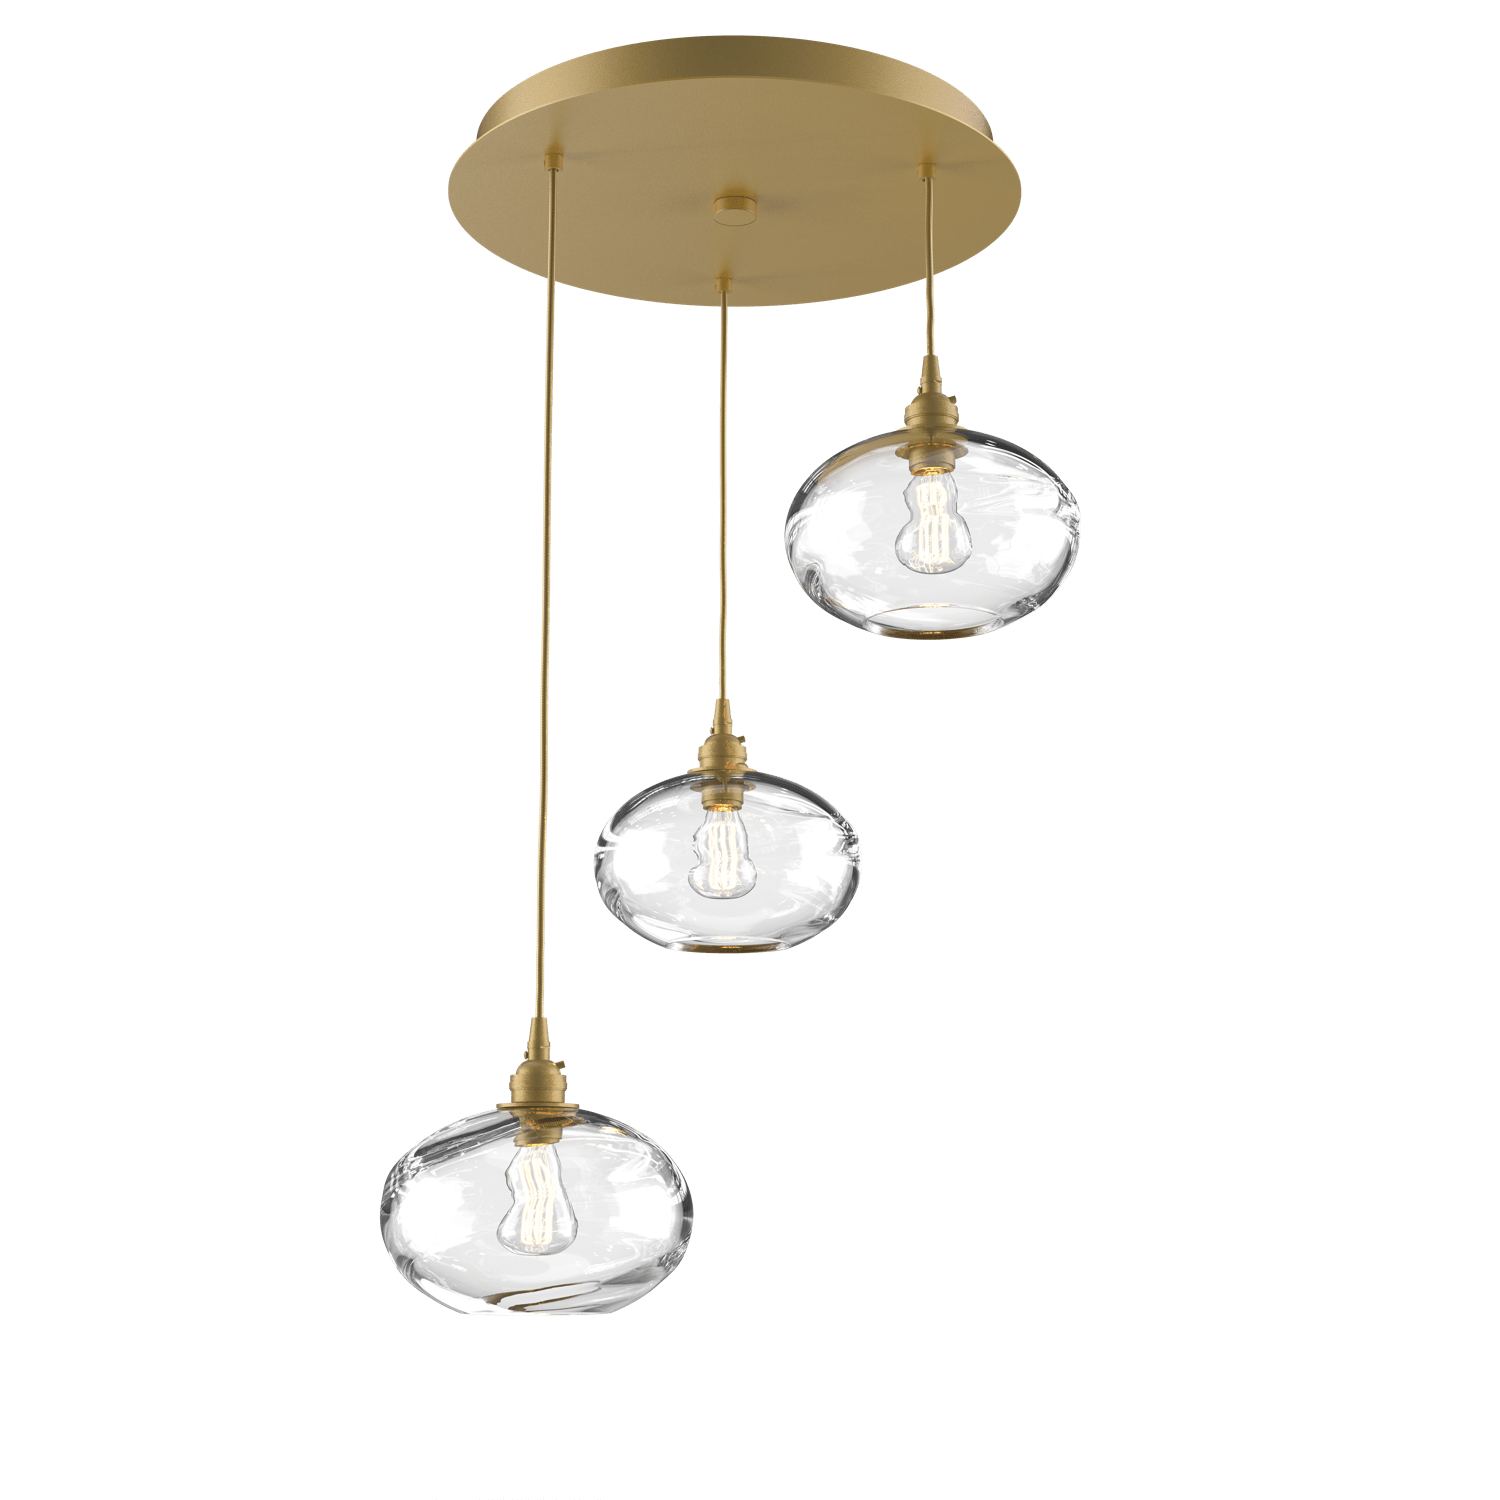 CHB0036-03-GB-OC-Hammerton-Studio-Optic-Blown-Glass-Coppa-3-light-round-pendant-chandelier-with-gilded-brass-finish-and-optic-clear-blown-glass-shades-and-incandescent-lamping